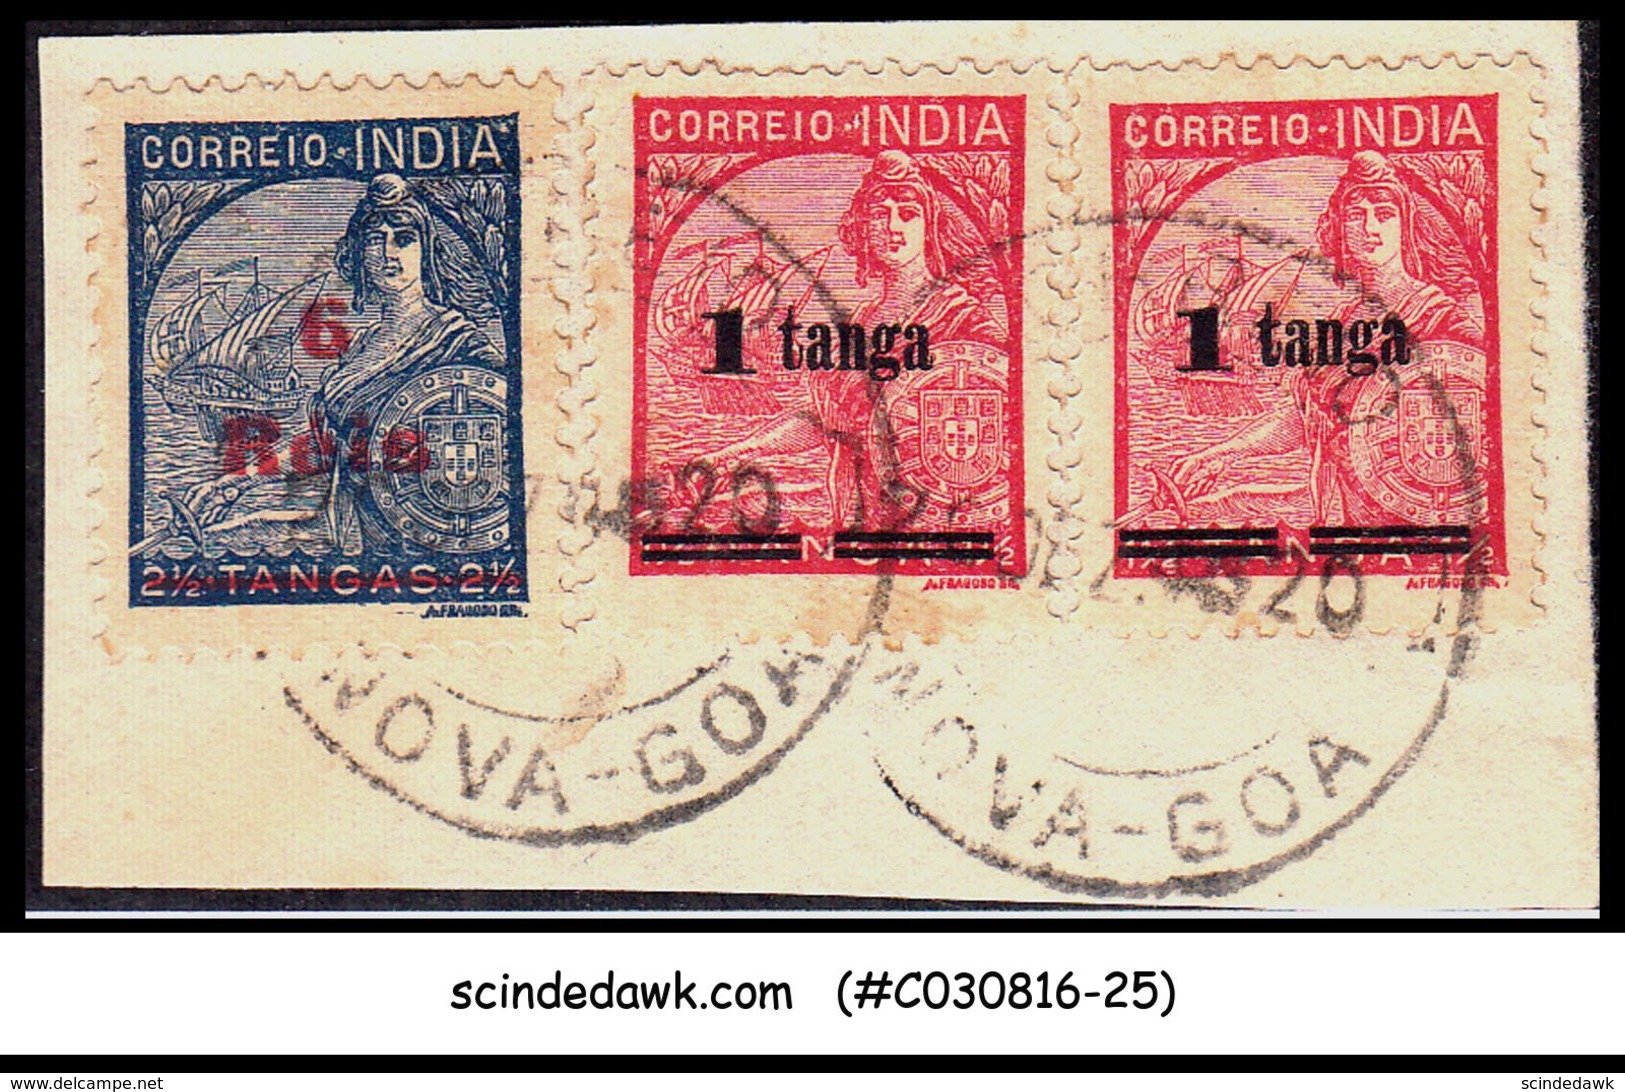 PORTUGESE INDIA - 1941-46 SCOTT#454 & 463 On ENVELOPE CUT-OUT - USED - Portugiesisch-Indien